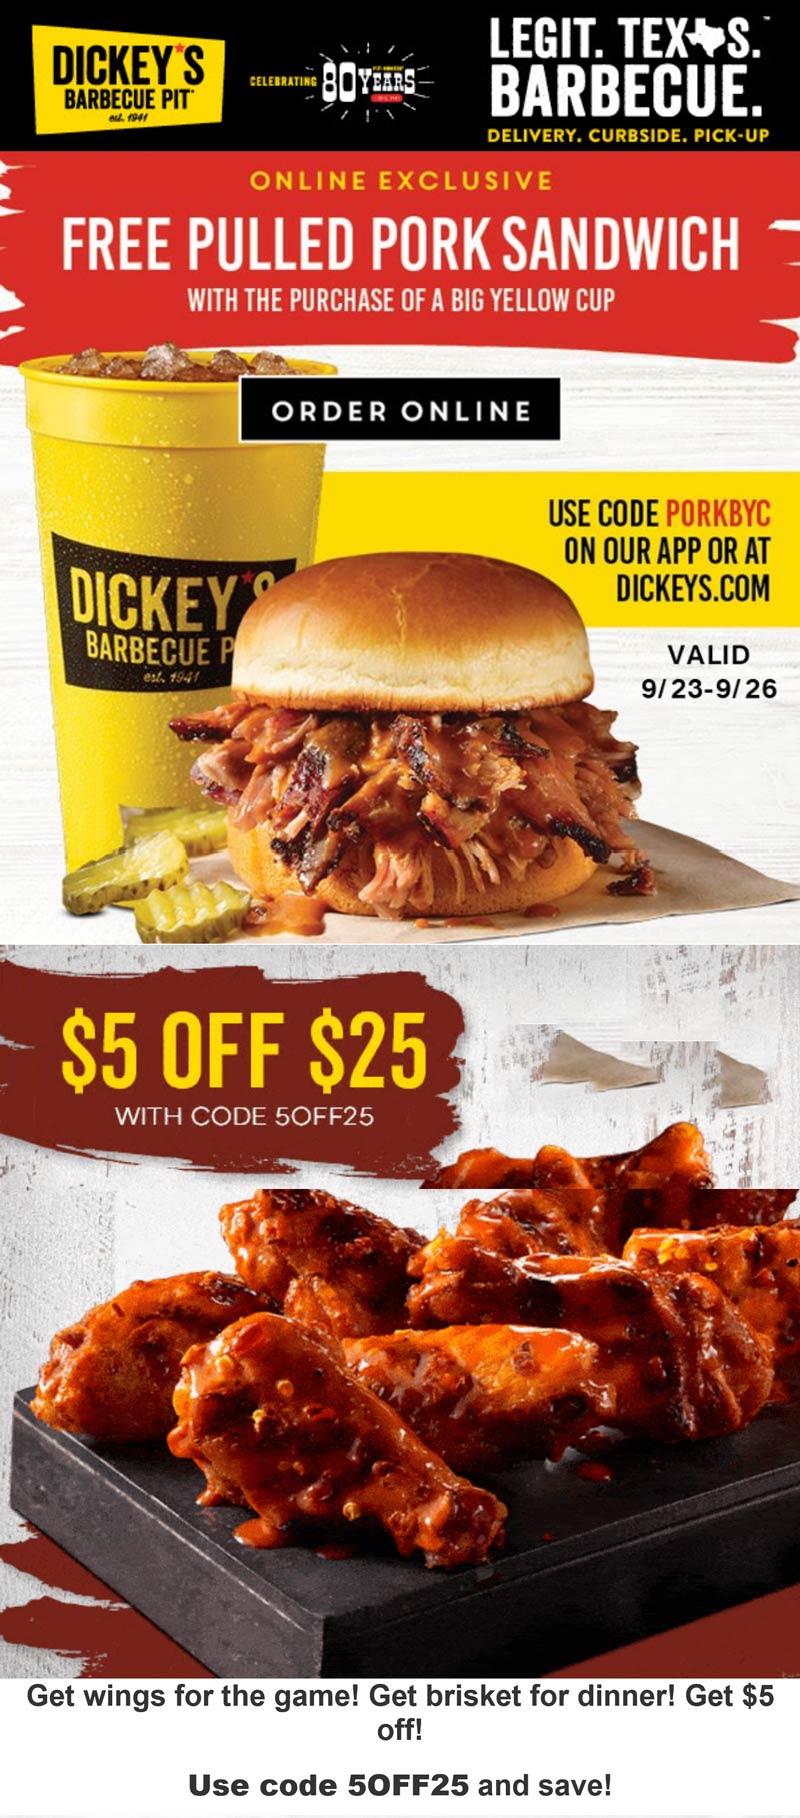 Dickeys Barbecue Pit restaurants Coupon  Free pulled pork sandwich with your yellow cup today at Dickeys Barbecue Pit via promo code PORKBYC #dickeysbarbecuepit 